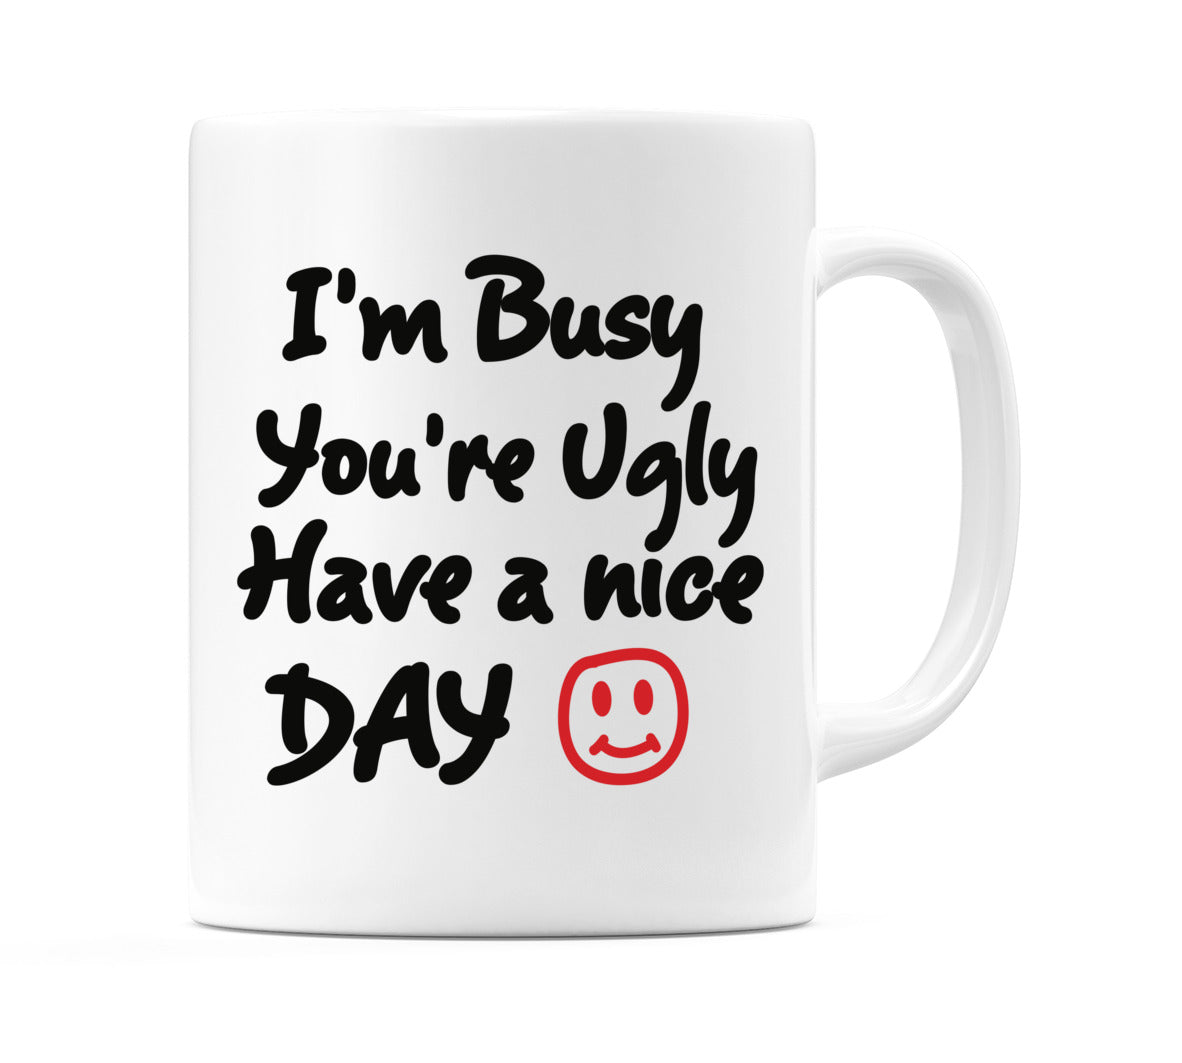 I'm Busy you're Ugly Have a nice DAY Mug